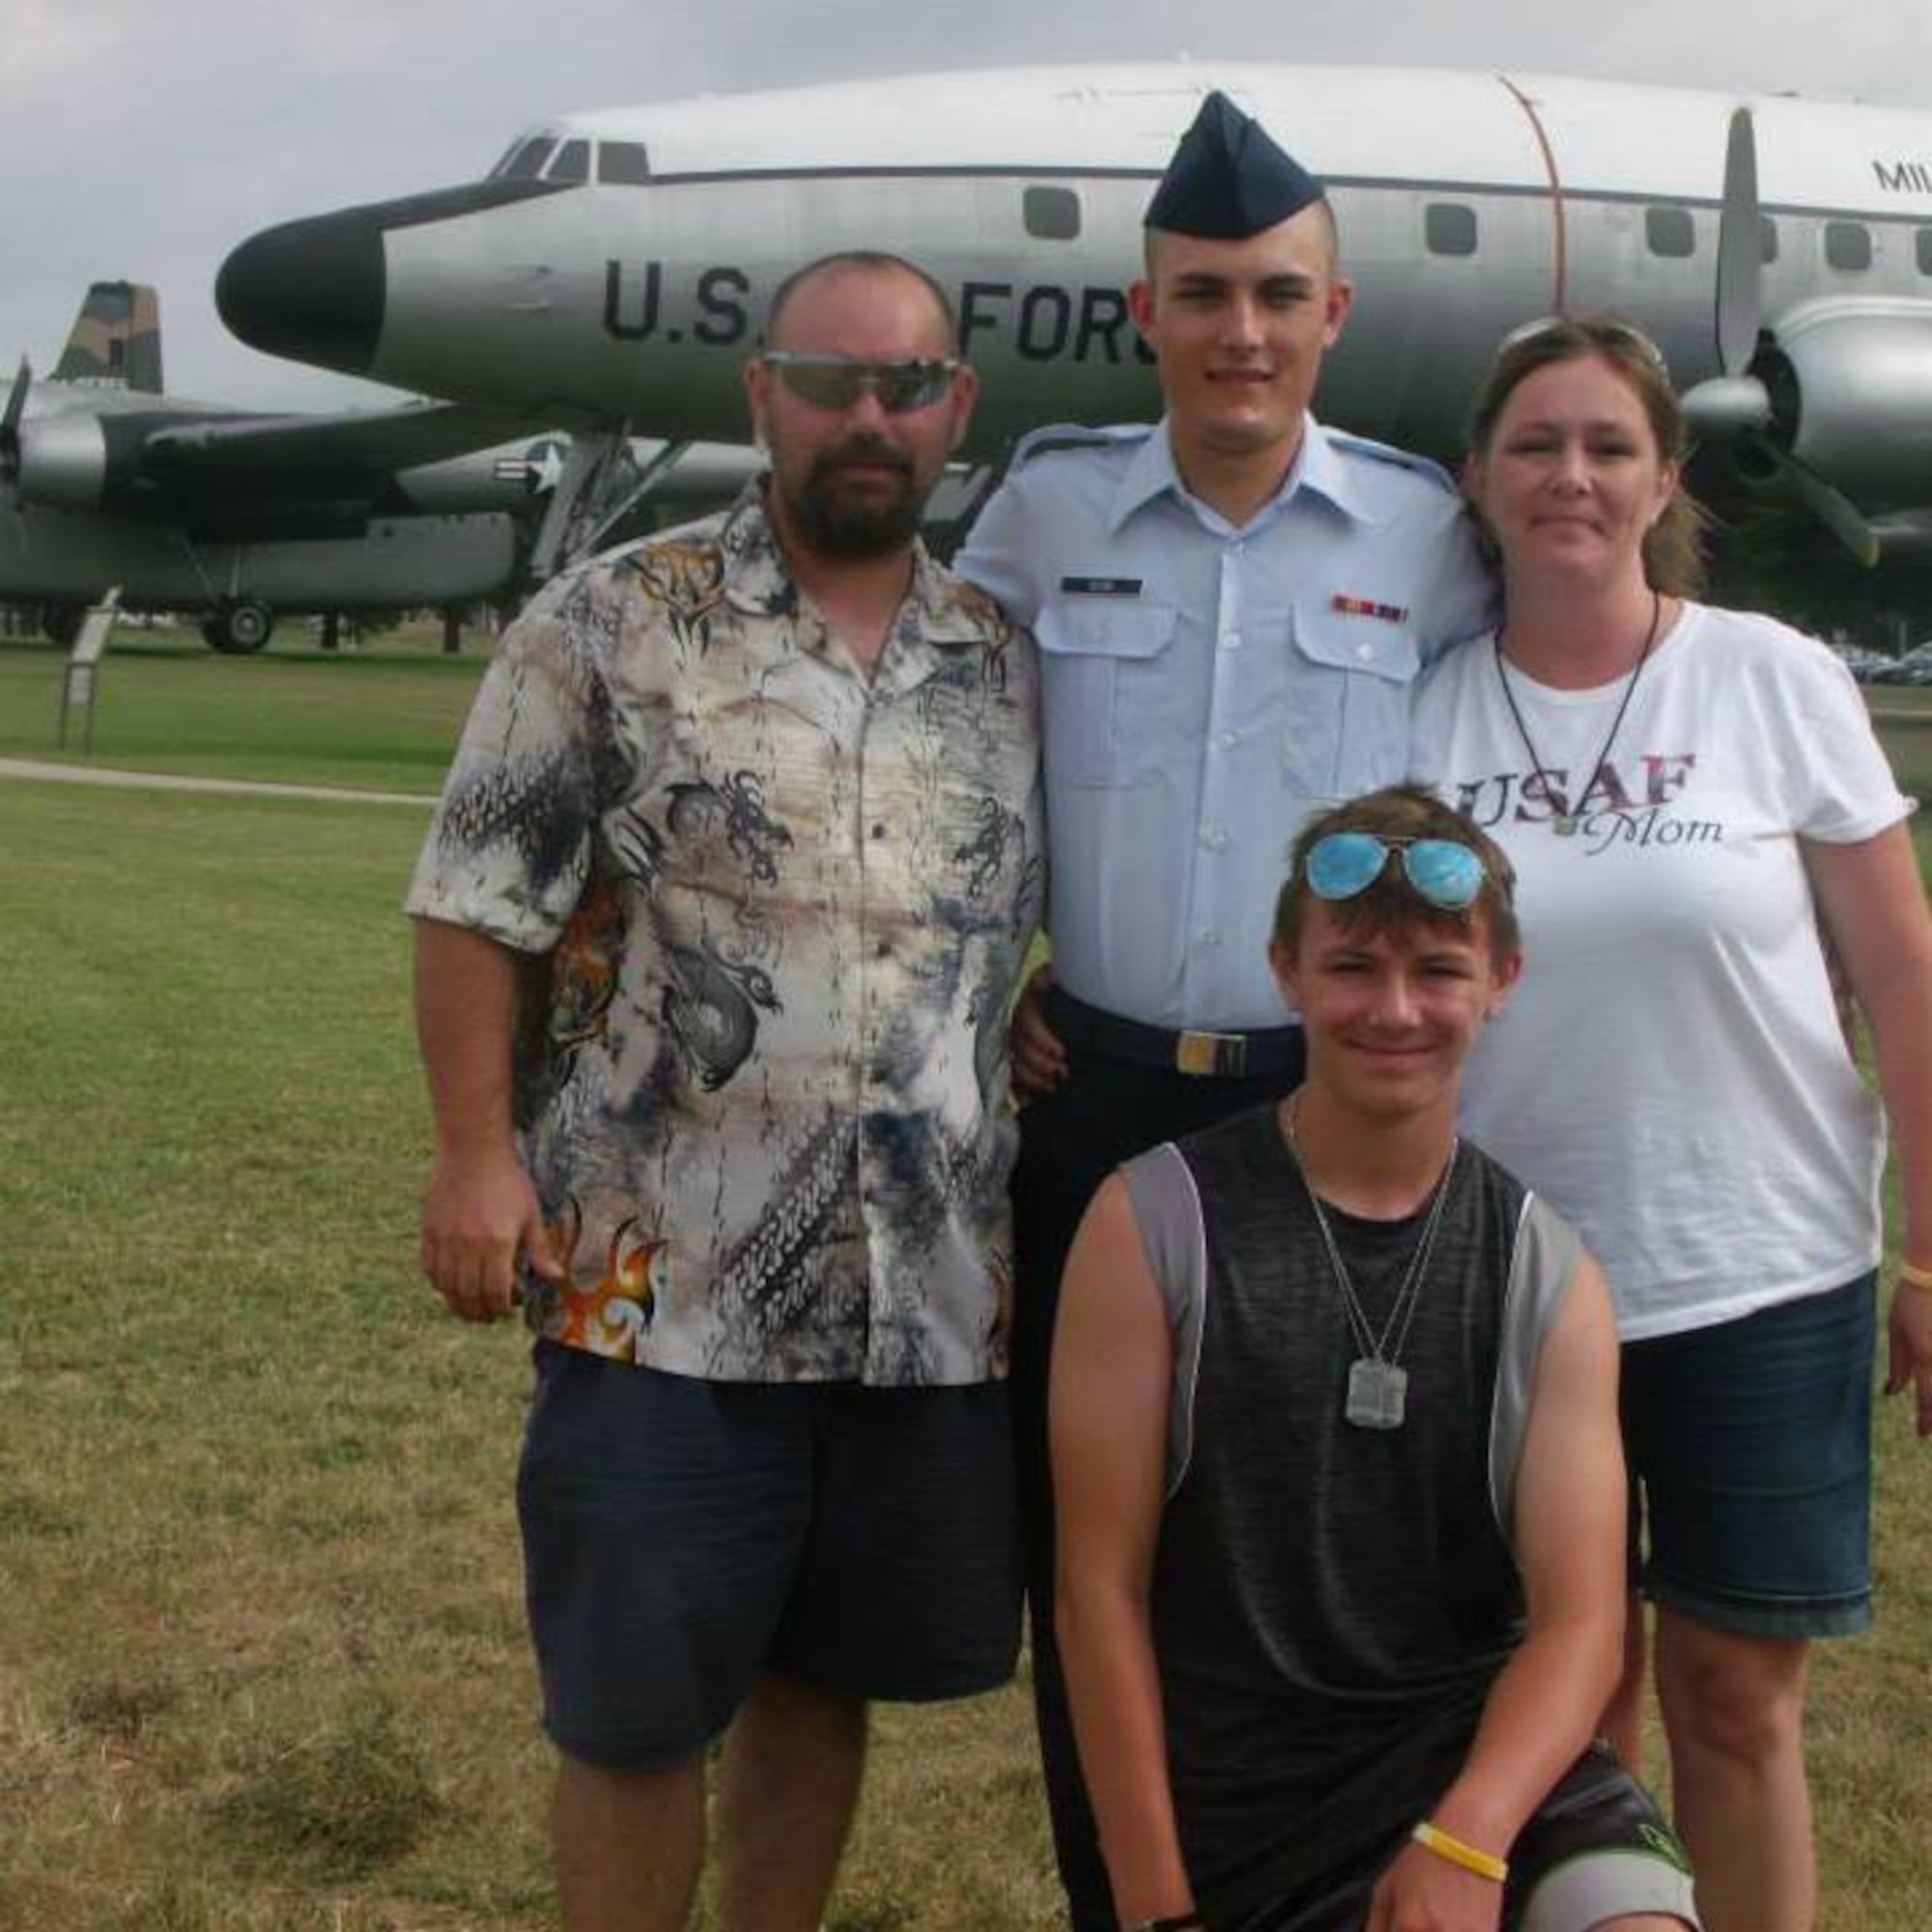 Then U.S. Airman Basic Jacob Beebe, center, poses with his family, Orin Pickering, left, Linda Pickering, right, and Dylan Pickering, front, at Joint Base San Antonio-Lackland, Texas, in July 2015.